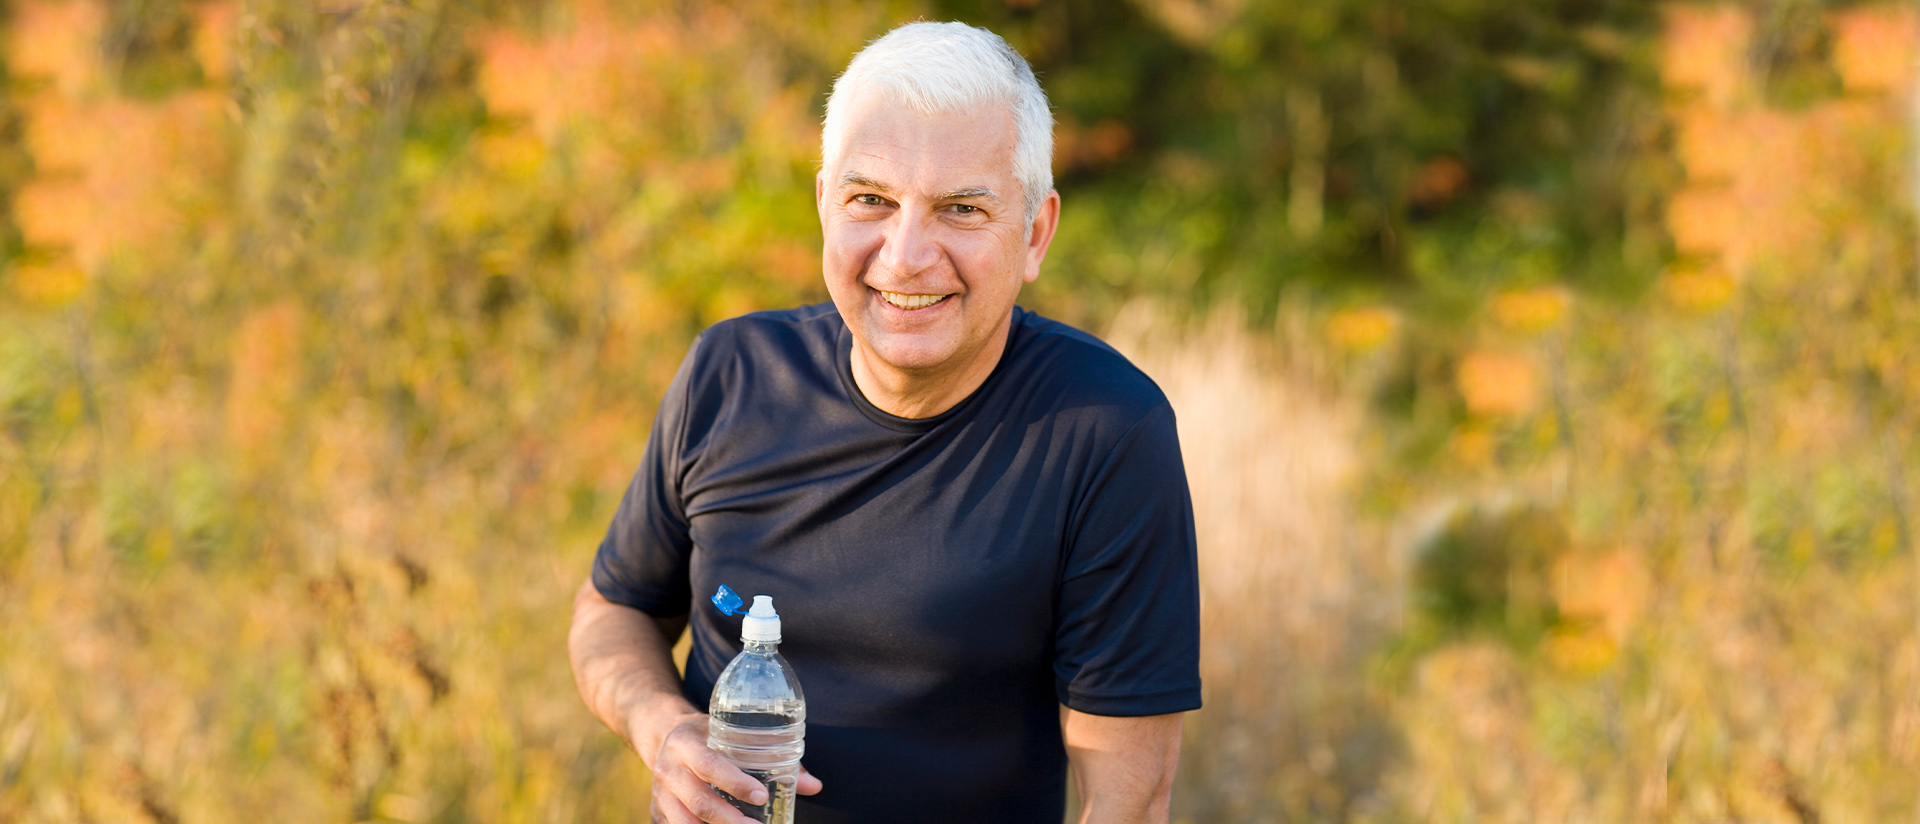 man smiling with water bottle 